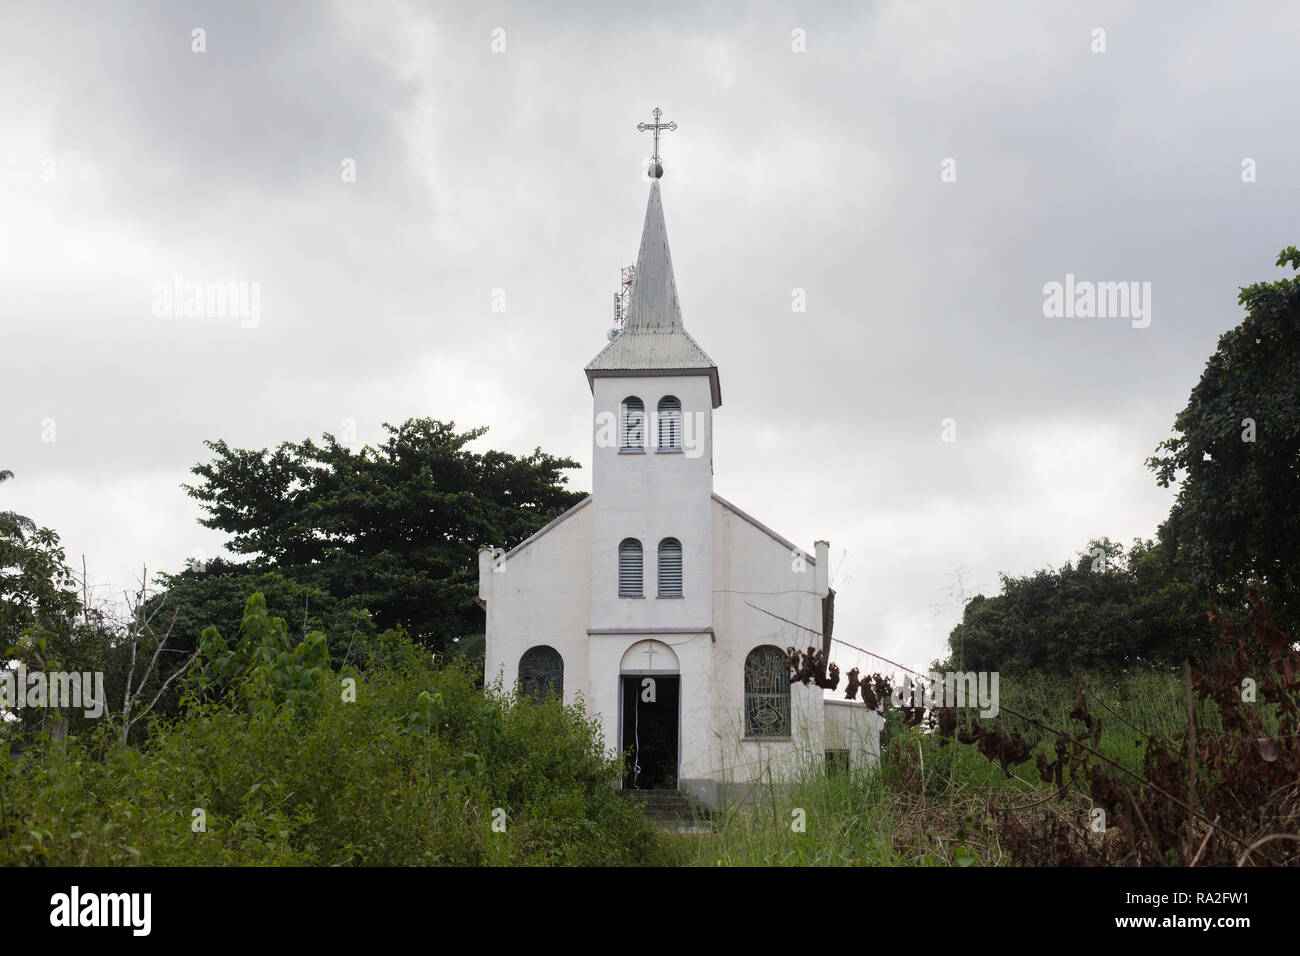 Kribi, Sud / Cameroon - February 12 2017: A colonial church outside on a hill close to the coastal town of Kribi, Cameroon. Stock Photo